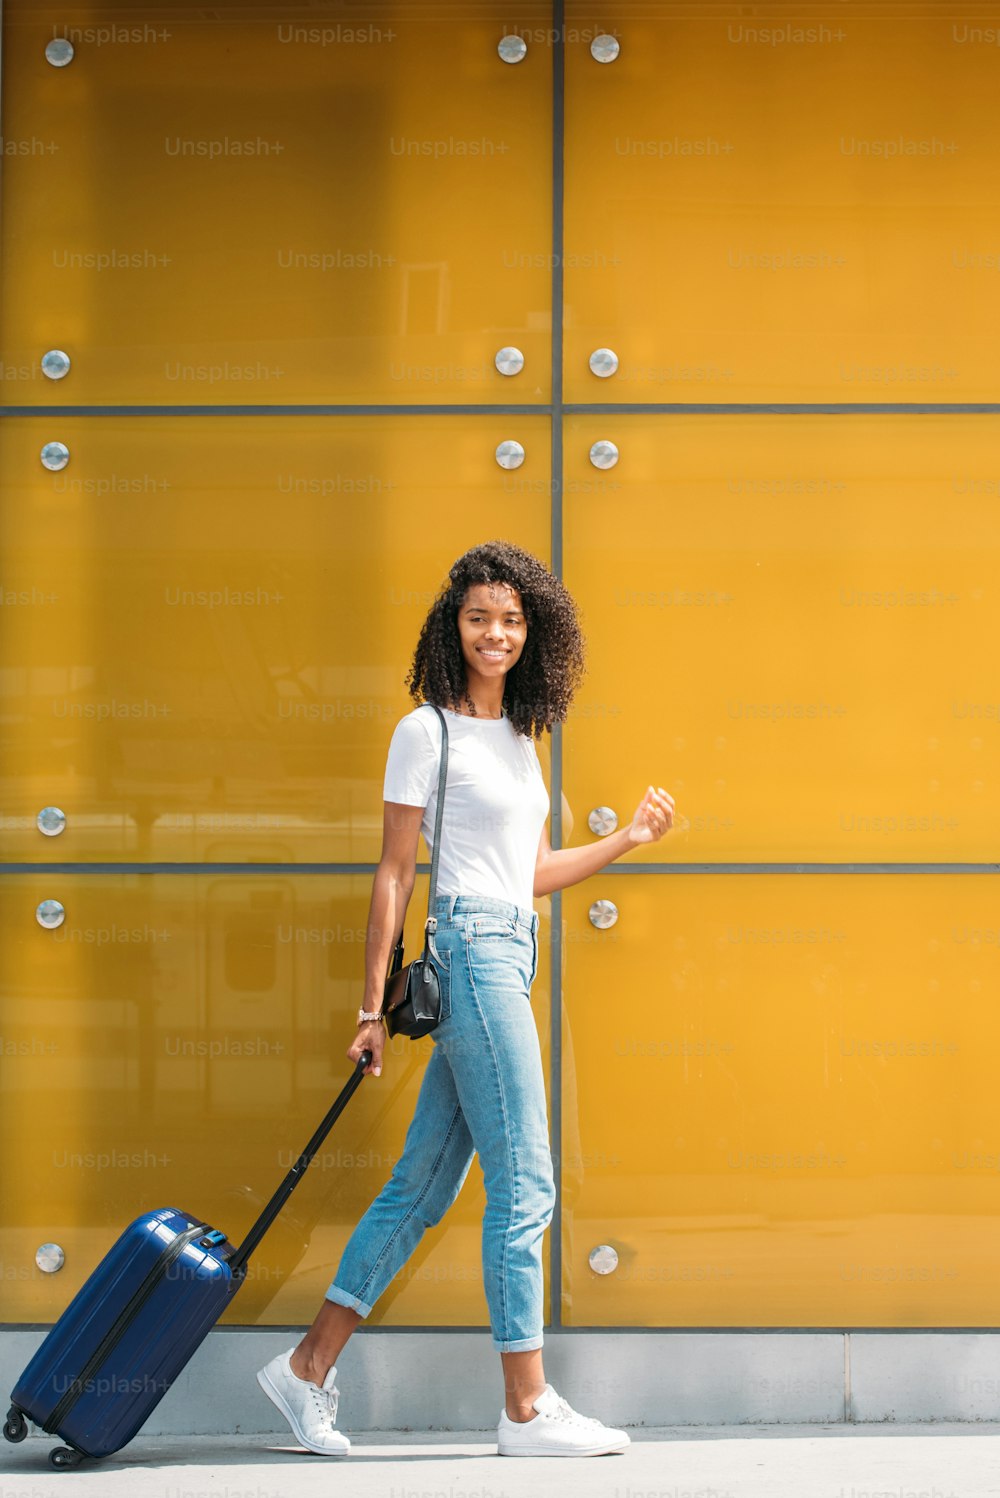 Woman walking and pushing a suitcase in a yellow glass background